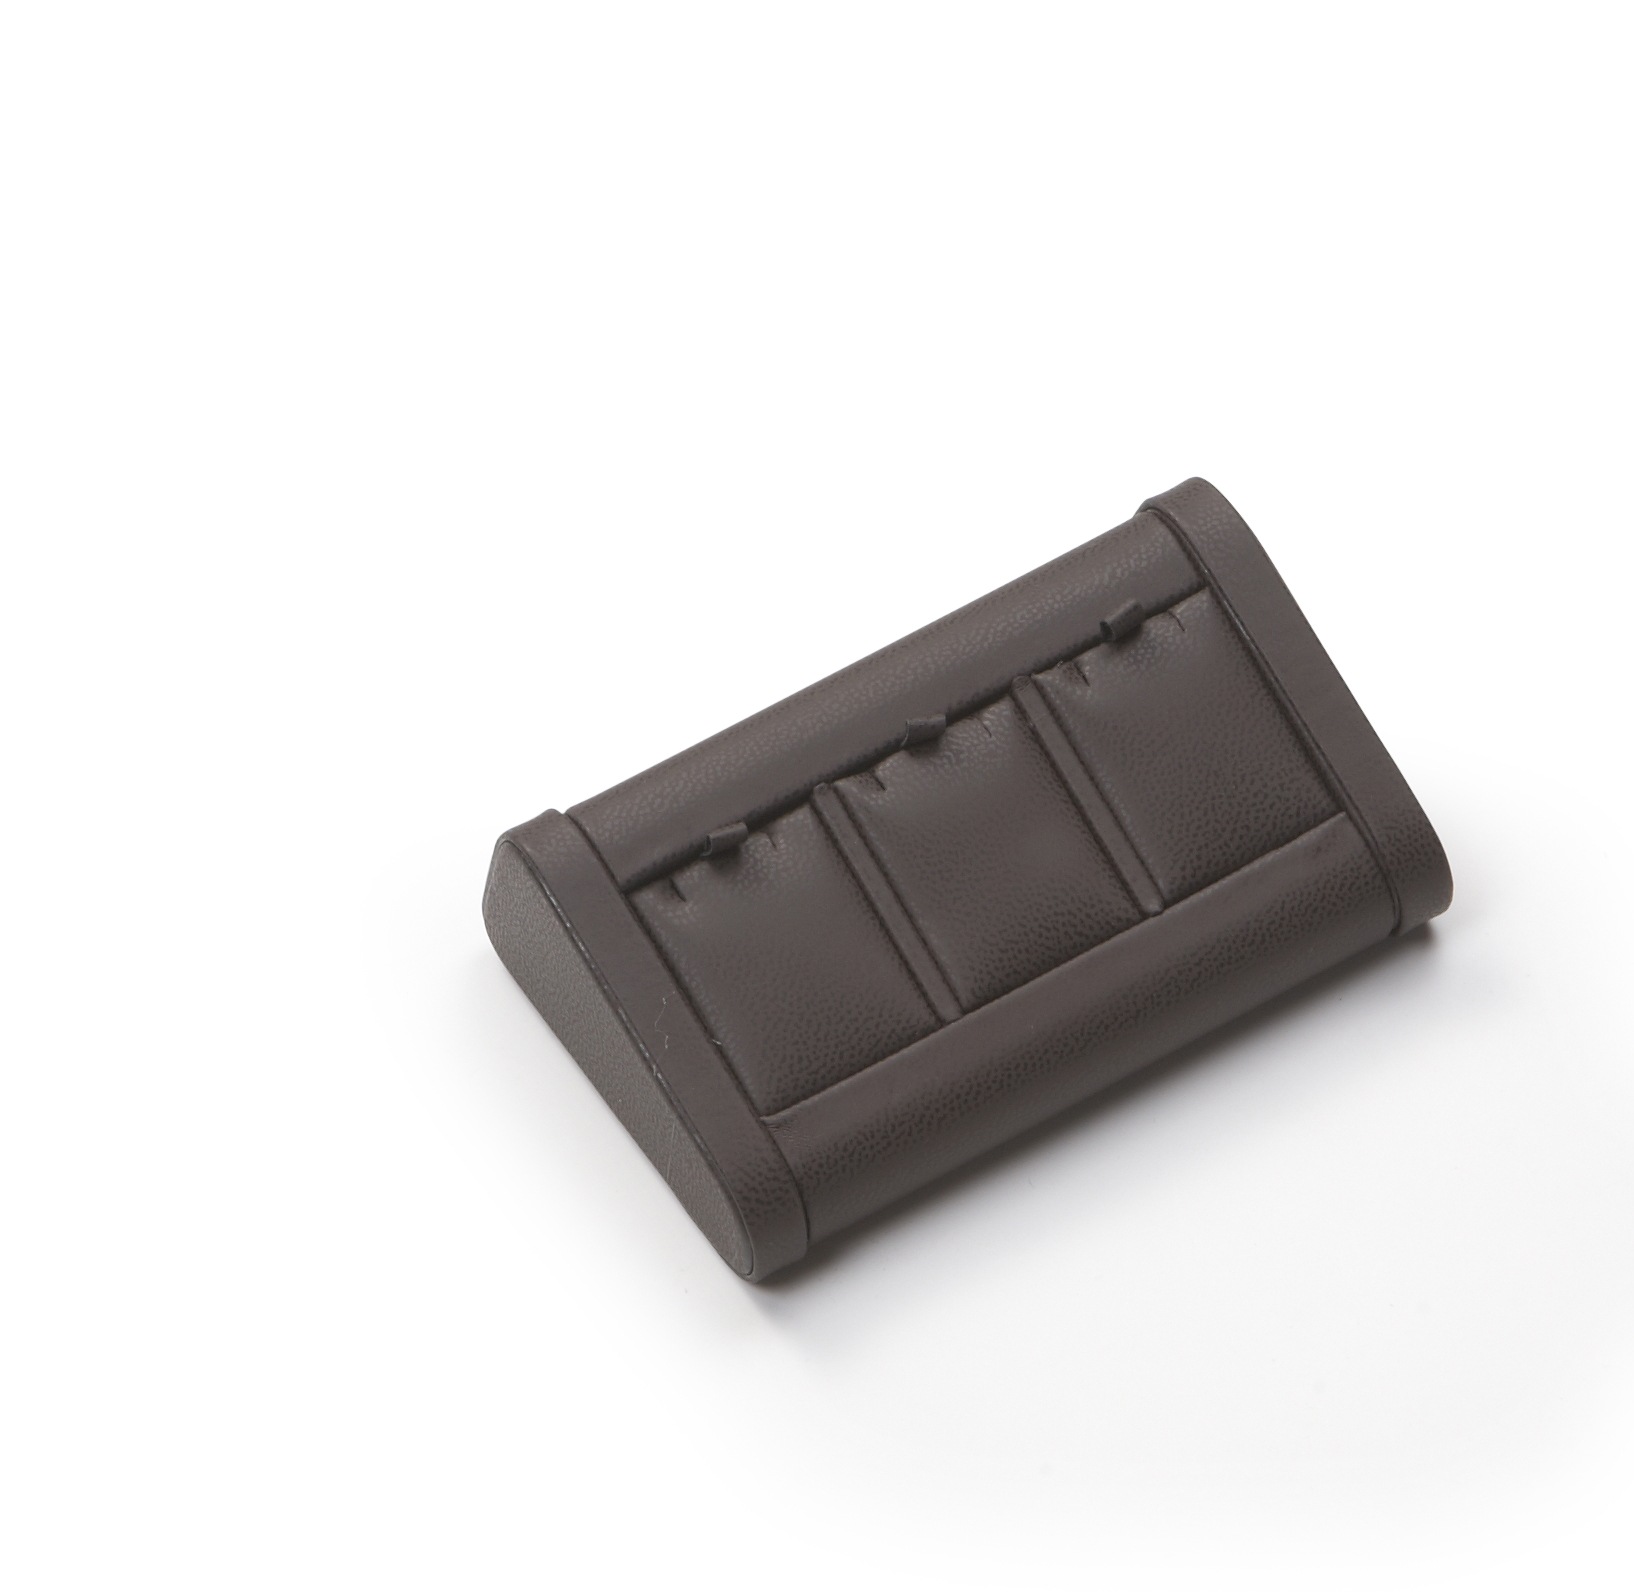 Chocolate Leatherette 3 Pendant Stand